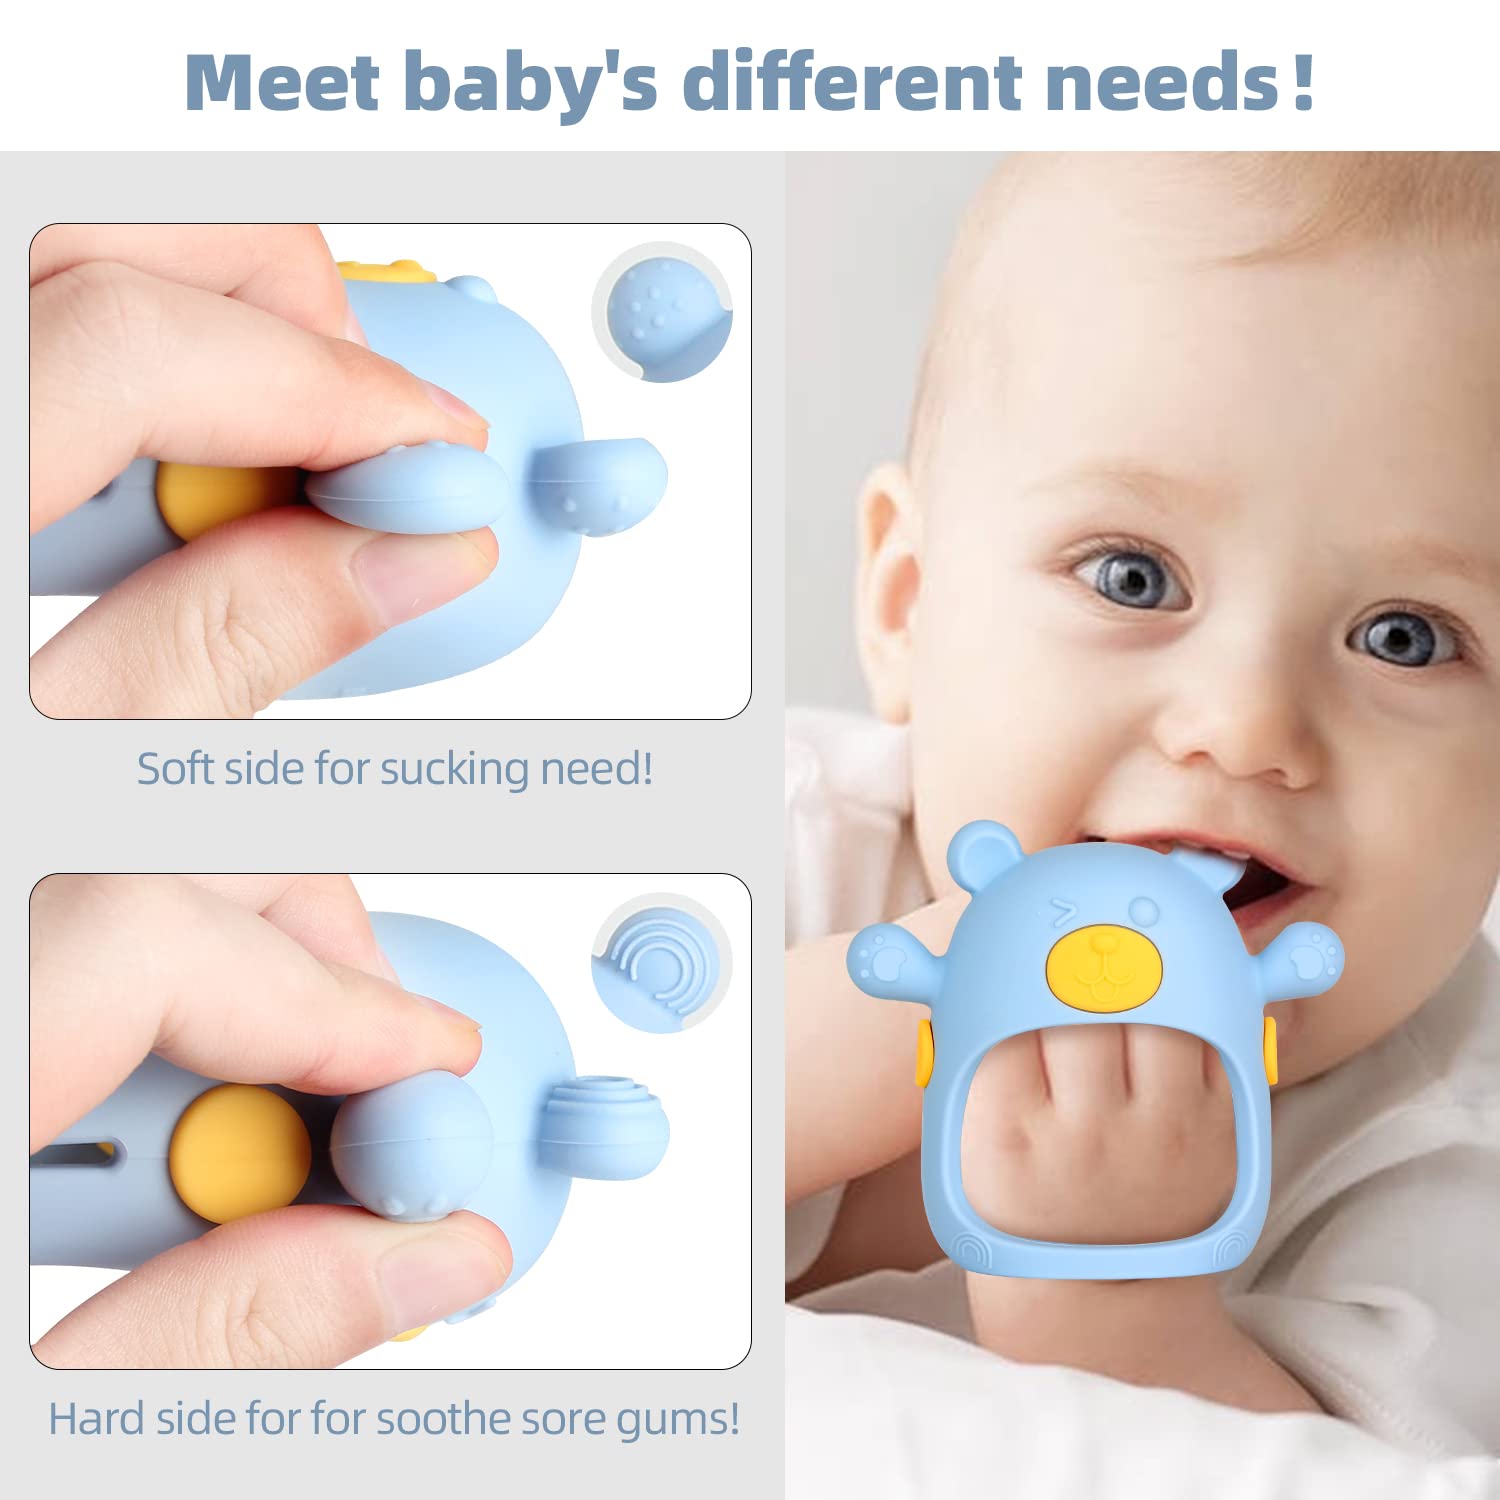 Fu Store Bear Anti-Dropping Silicone Baby Teething Toy Infants Baby Chew Toys for Sucking Needs, Hand Pacifier for Breast Feeding Babies for New Born (1 Blue & 1 Finger Toothbrush)